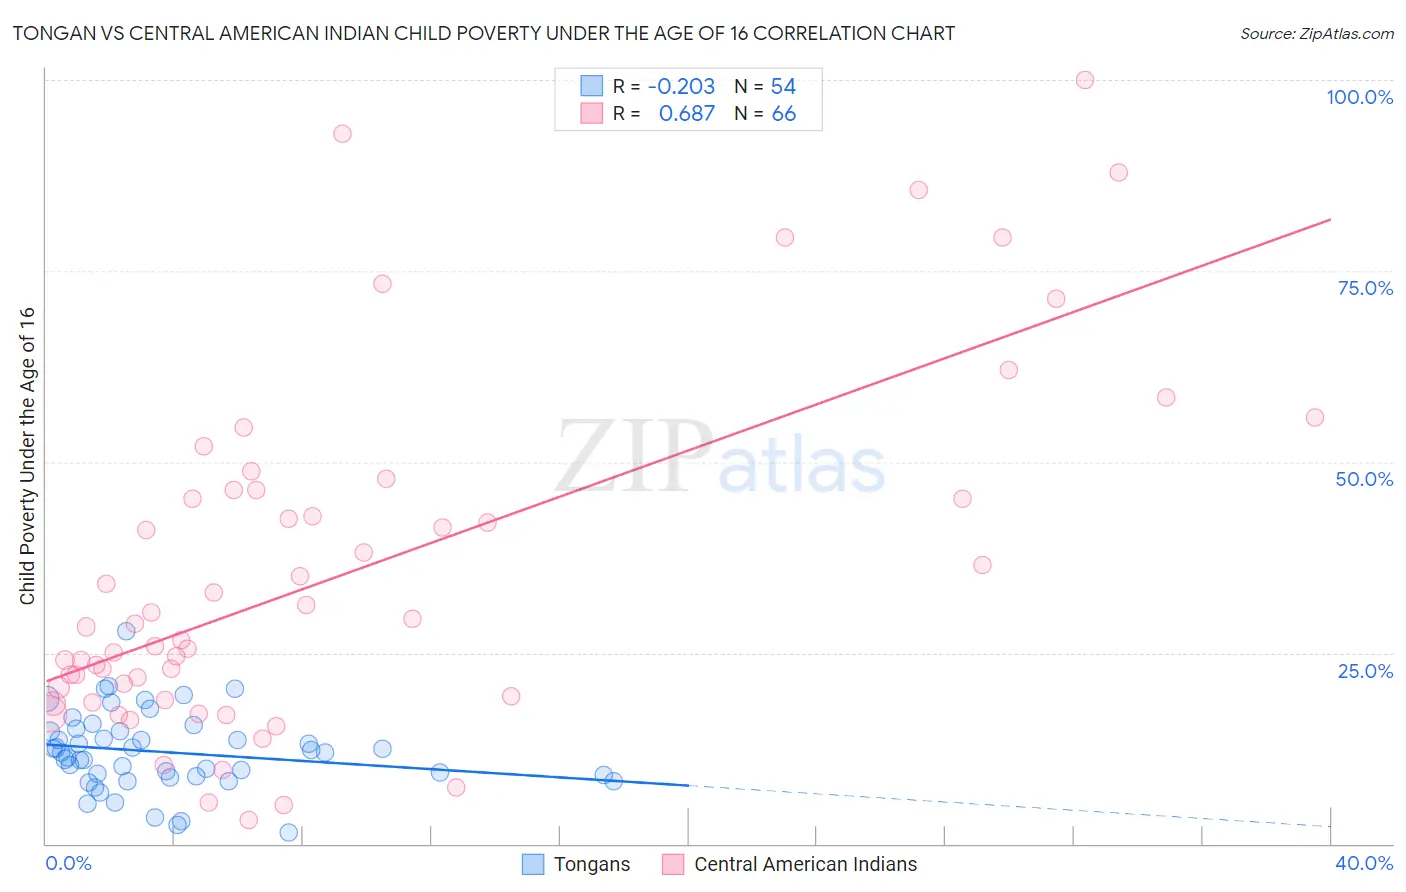 Tongan vs Central American Indian Child Poverty Under the Age of 16